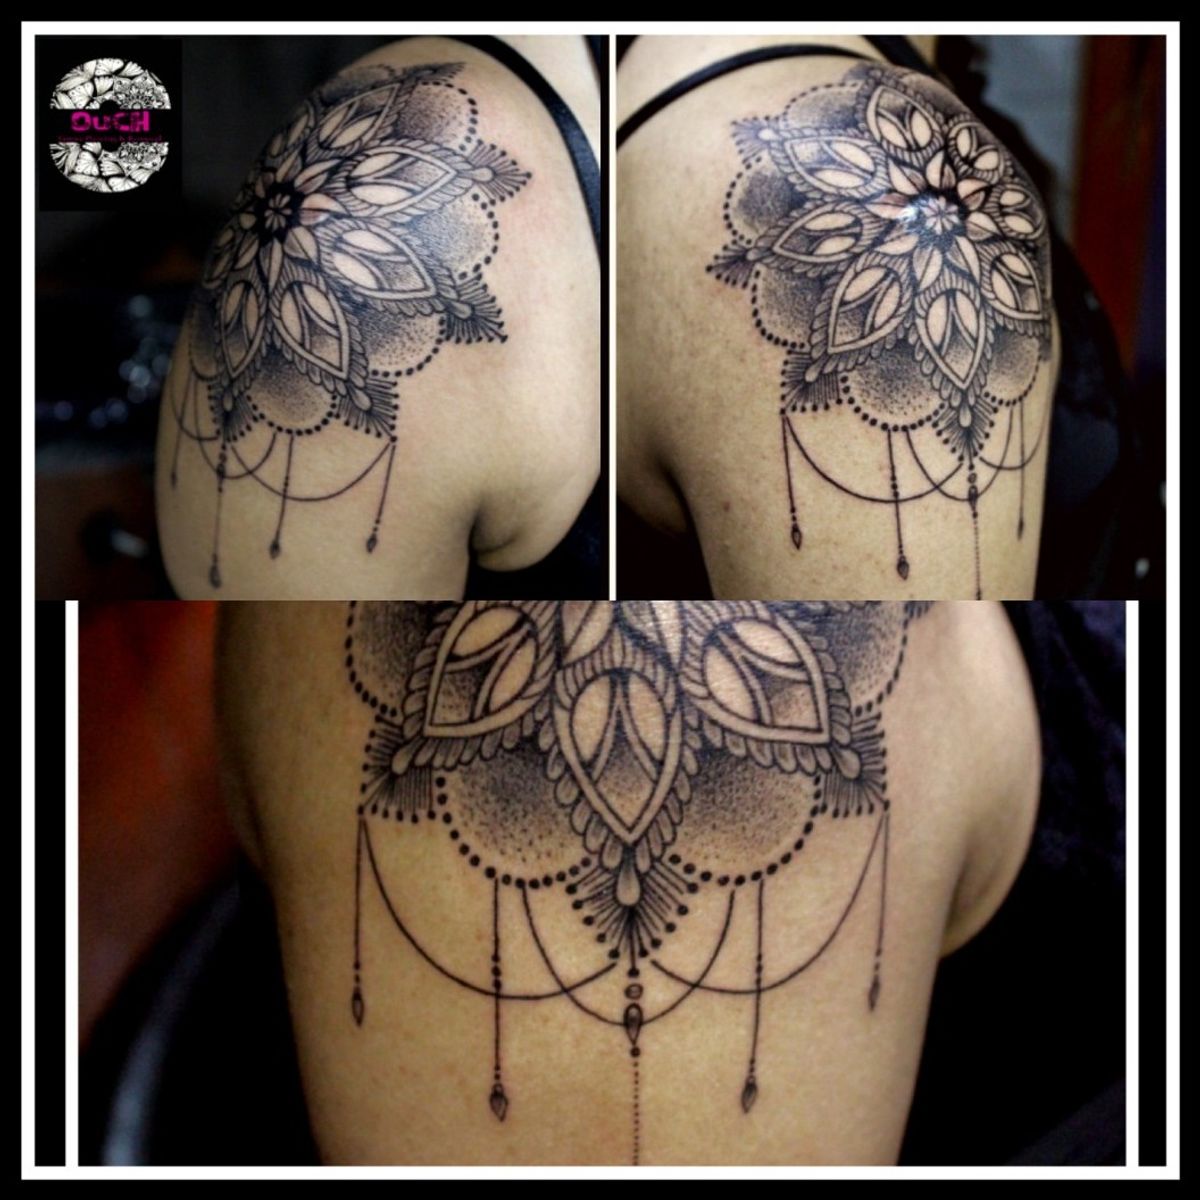 Tattoo uploaded by OUCH (Tattoo & Piercing) • Mandala art at OUCH • Tattoodo